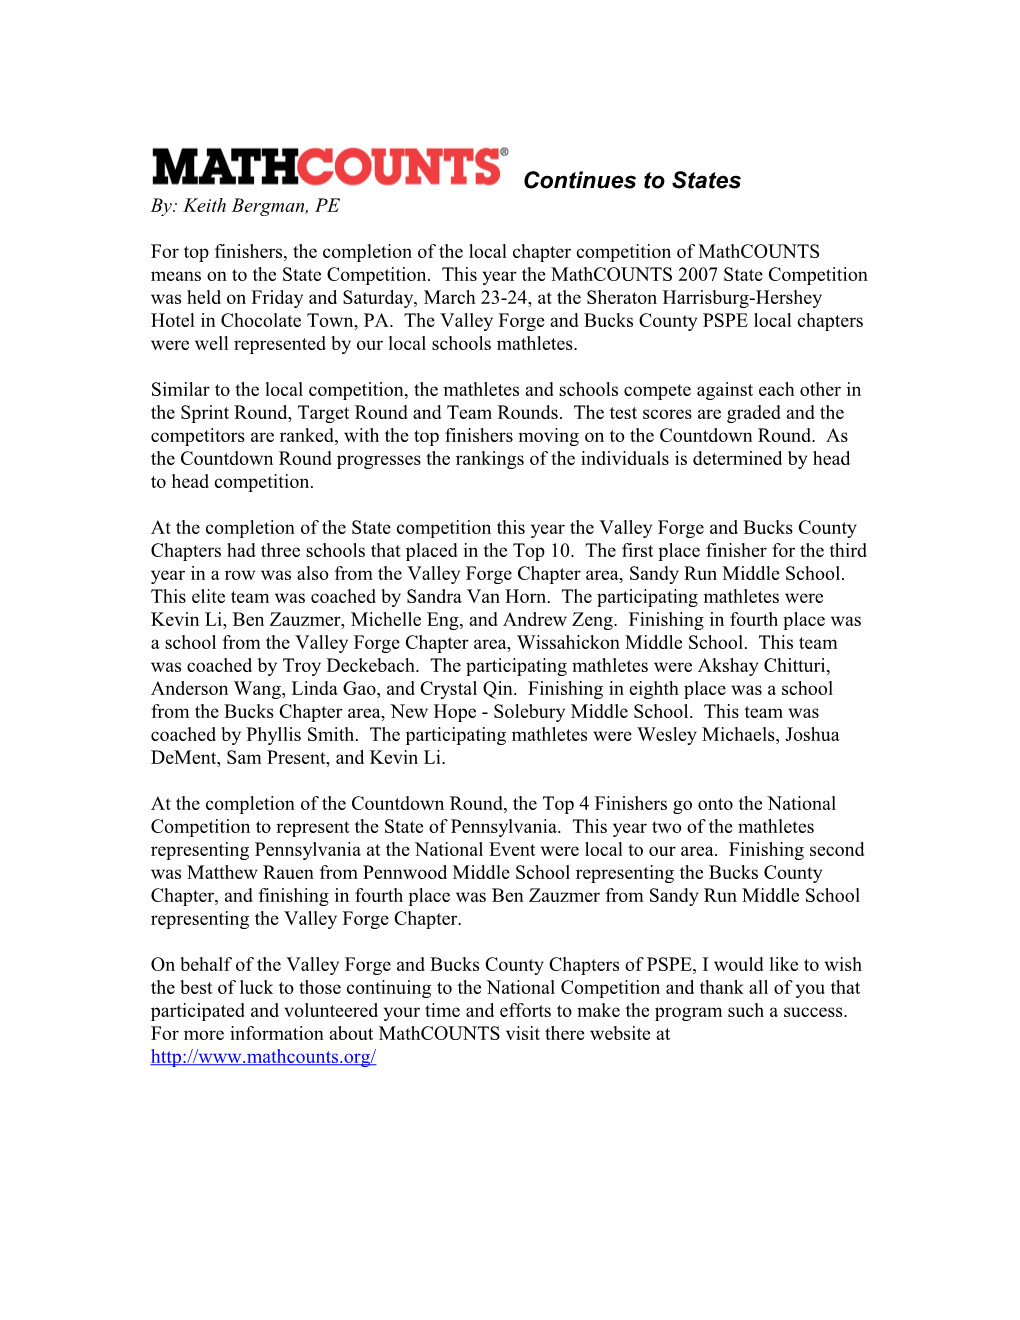 Mathcounts 2007 Continues to States